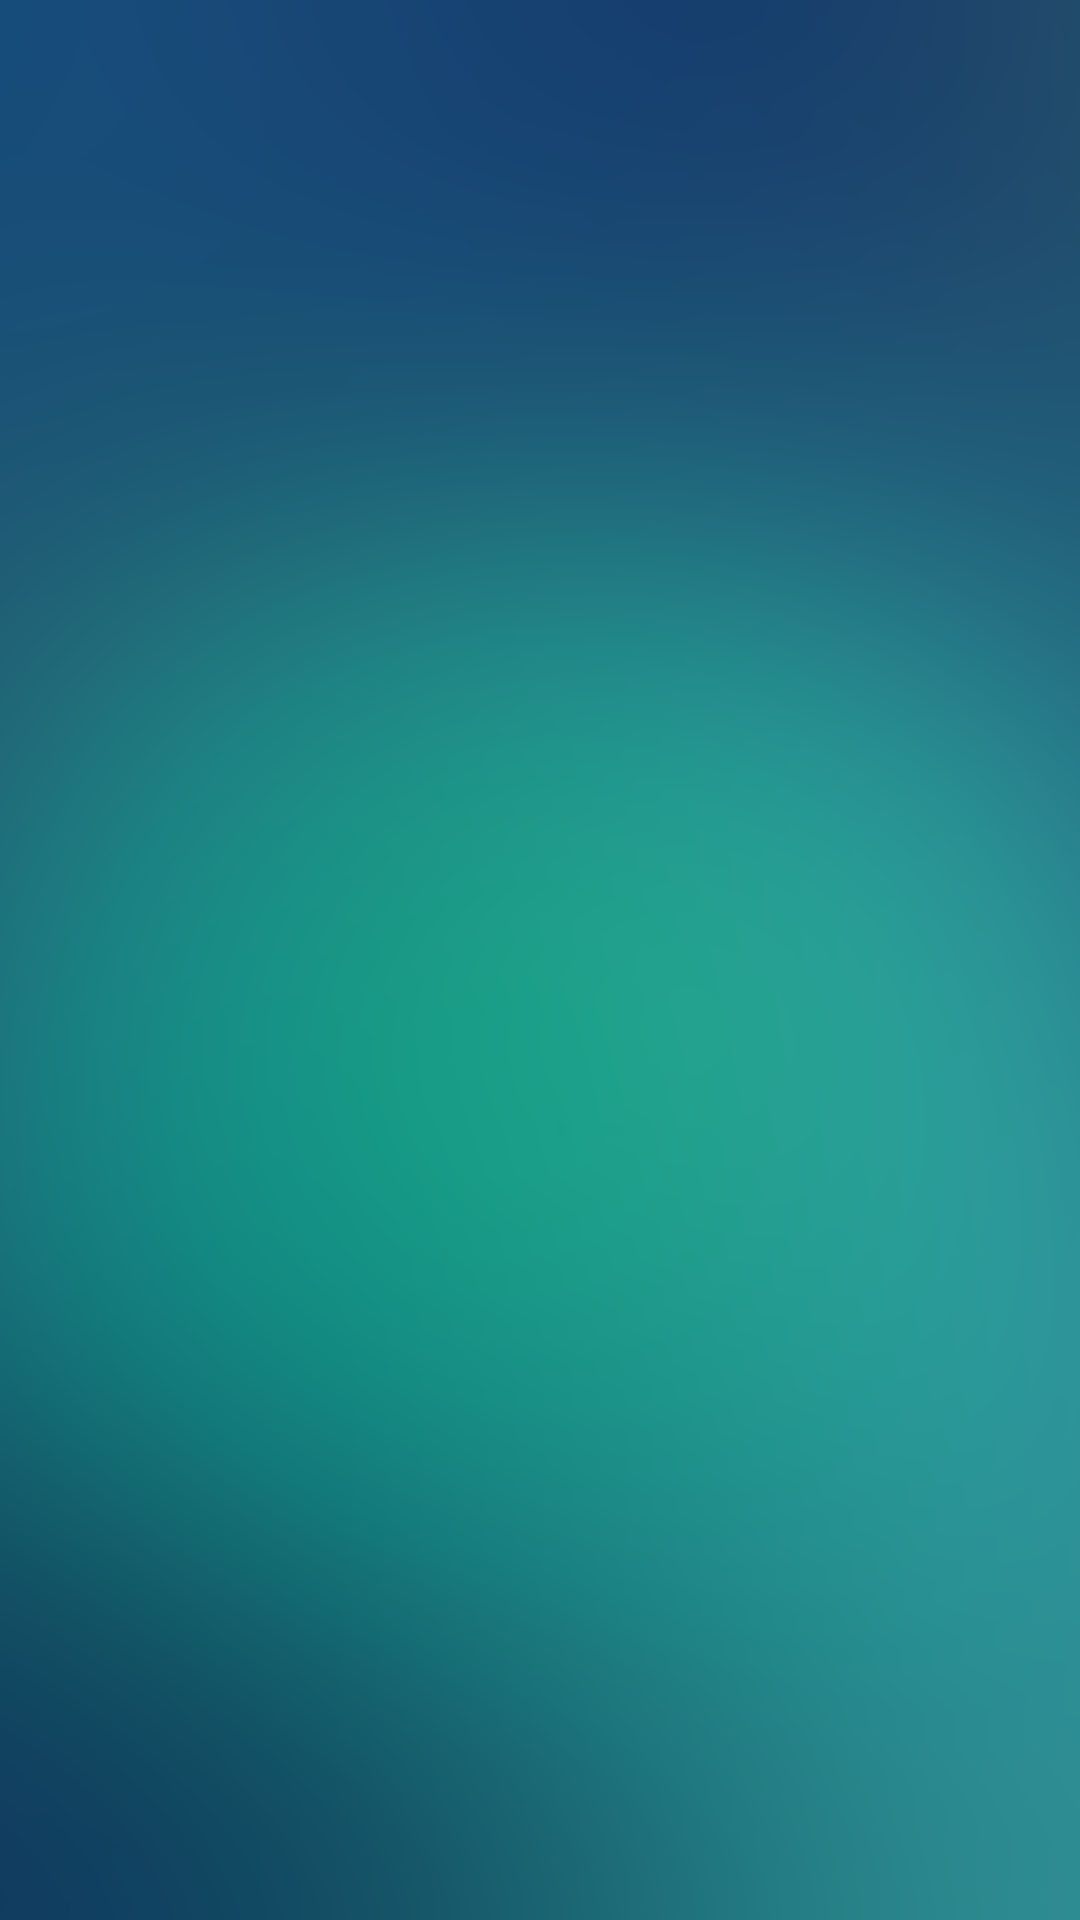 Blue Green Circle Gradient Android Wallpaper free download